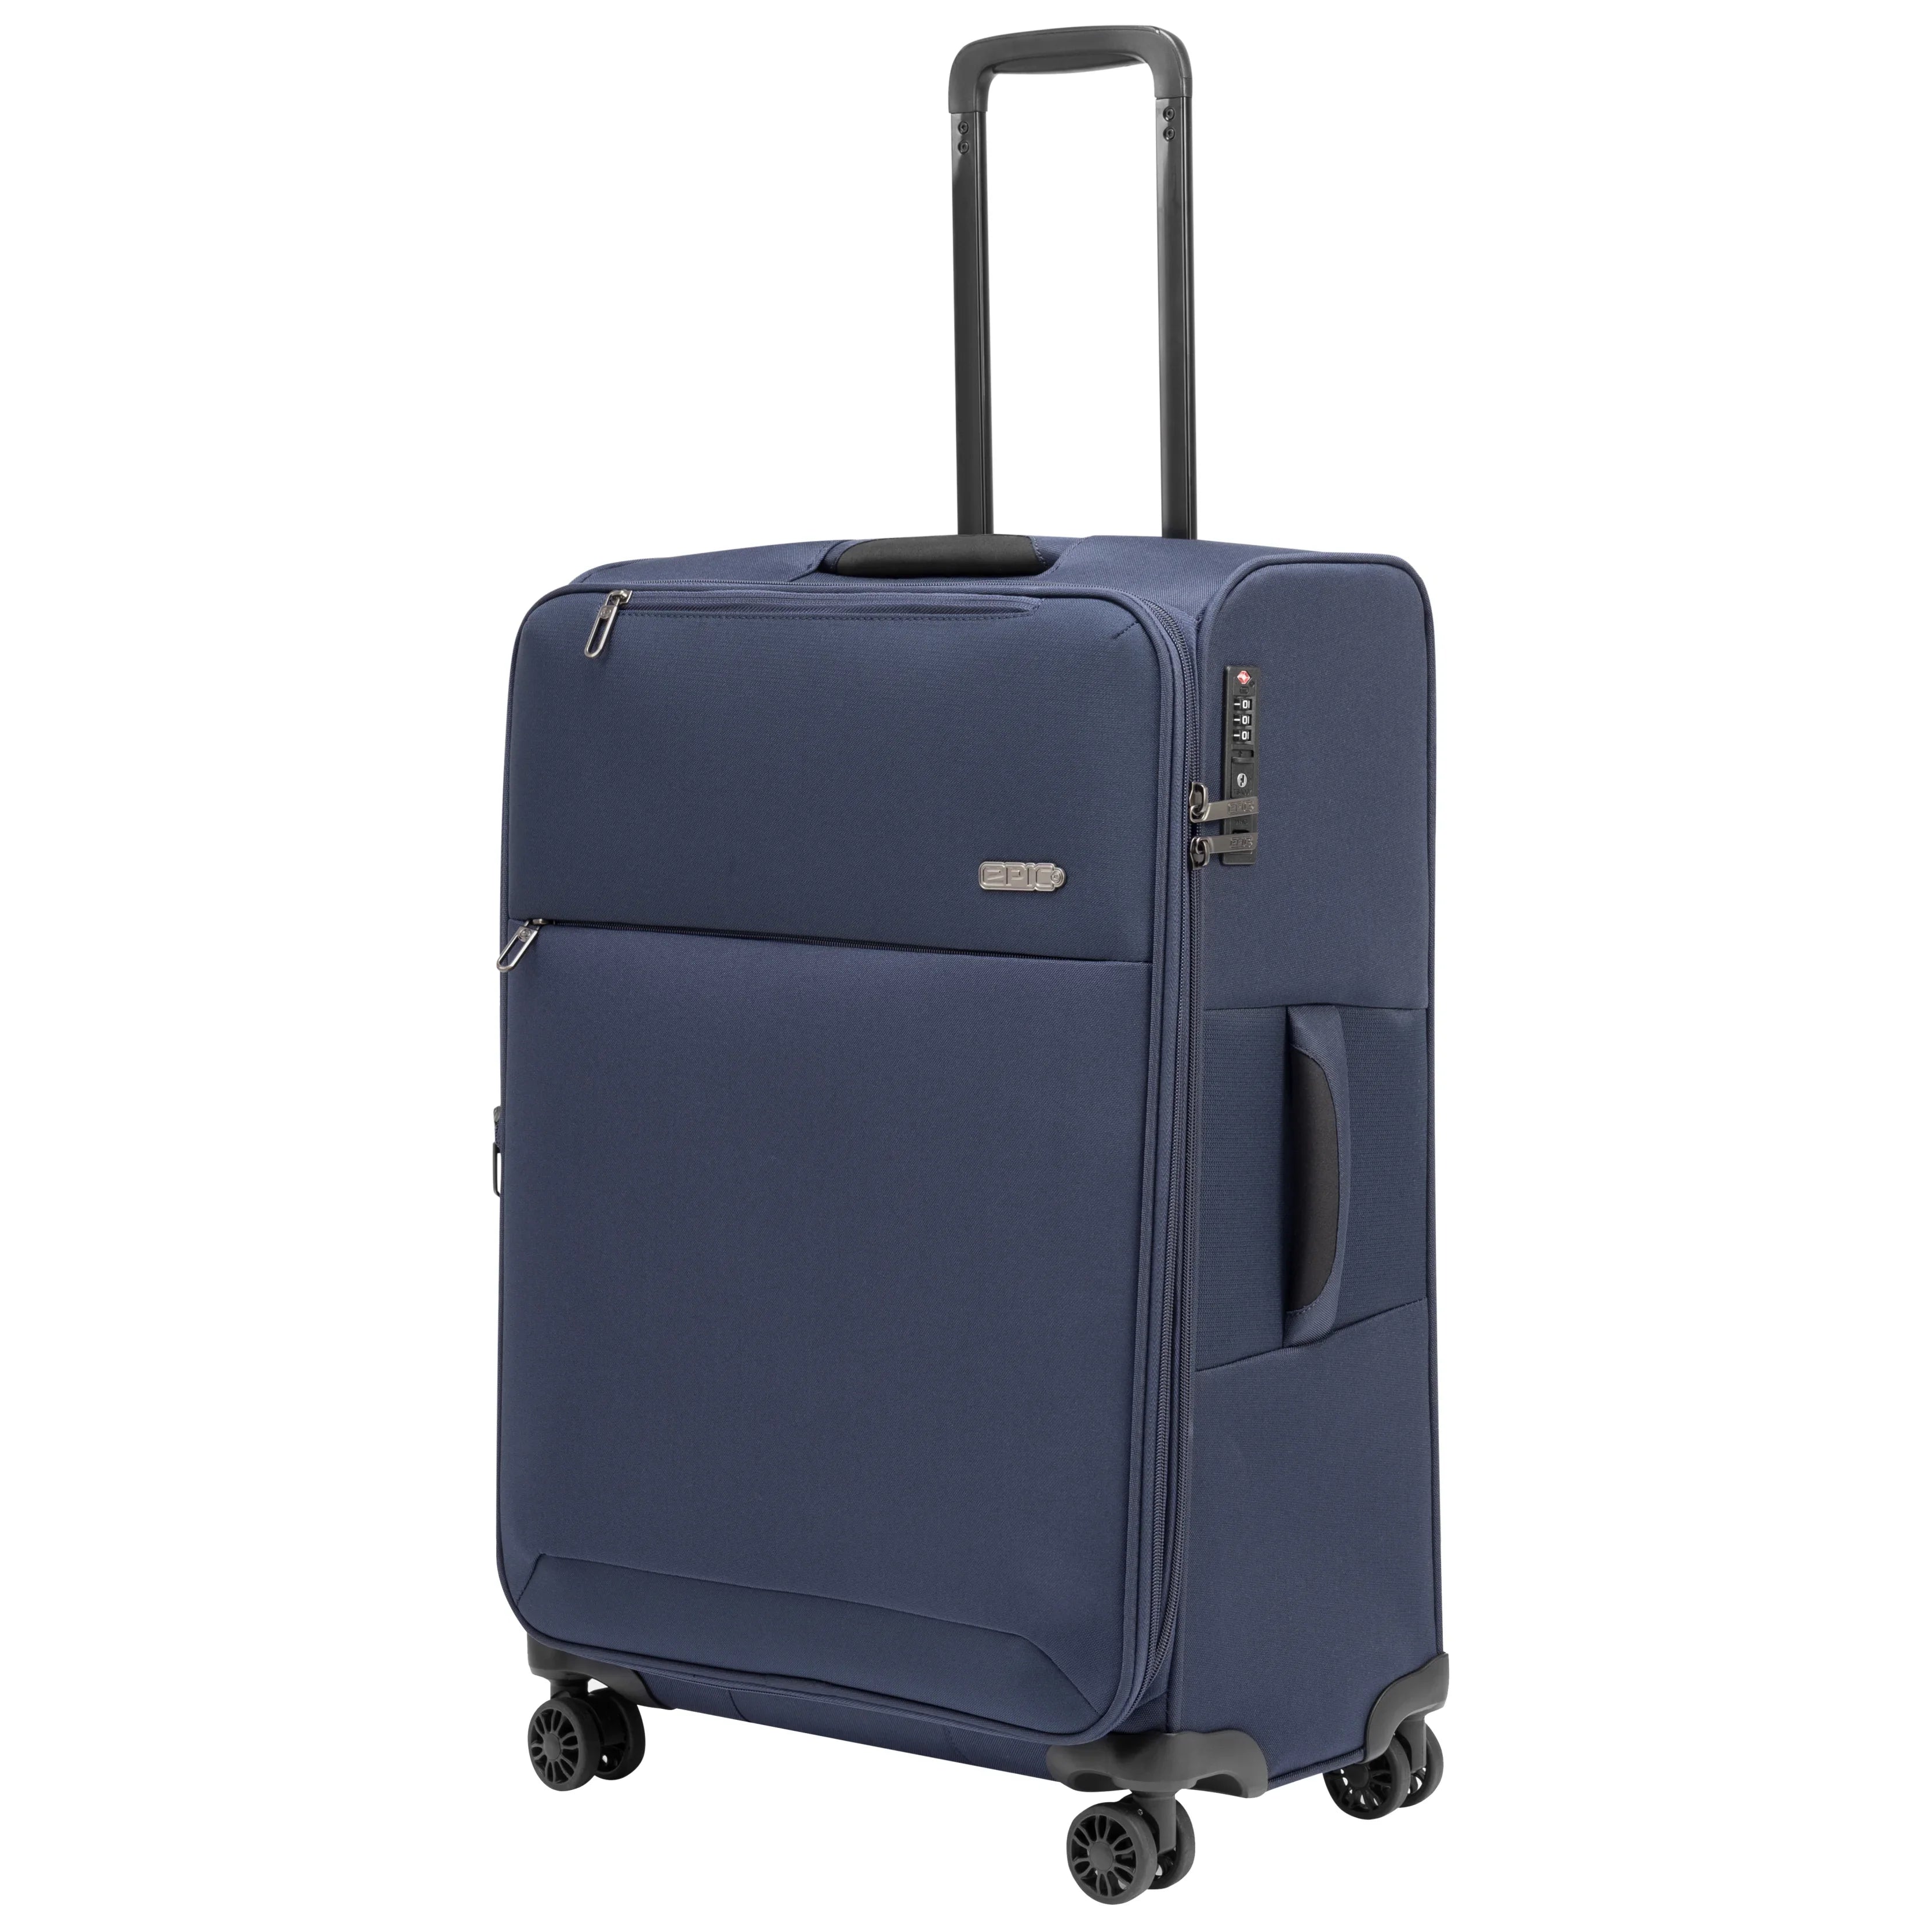 Epic Discovery Neo 4-wheel trolley 67 cm - navy blue